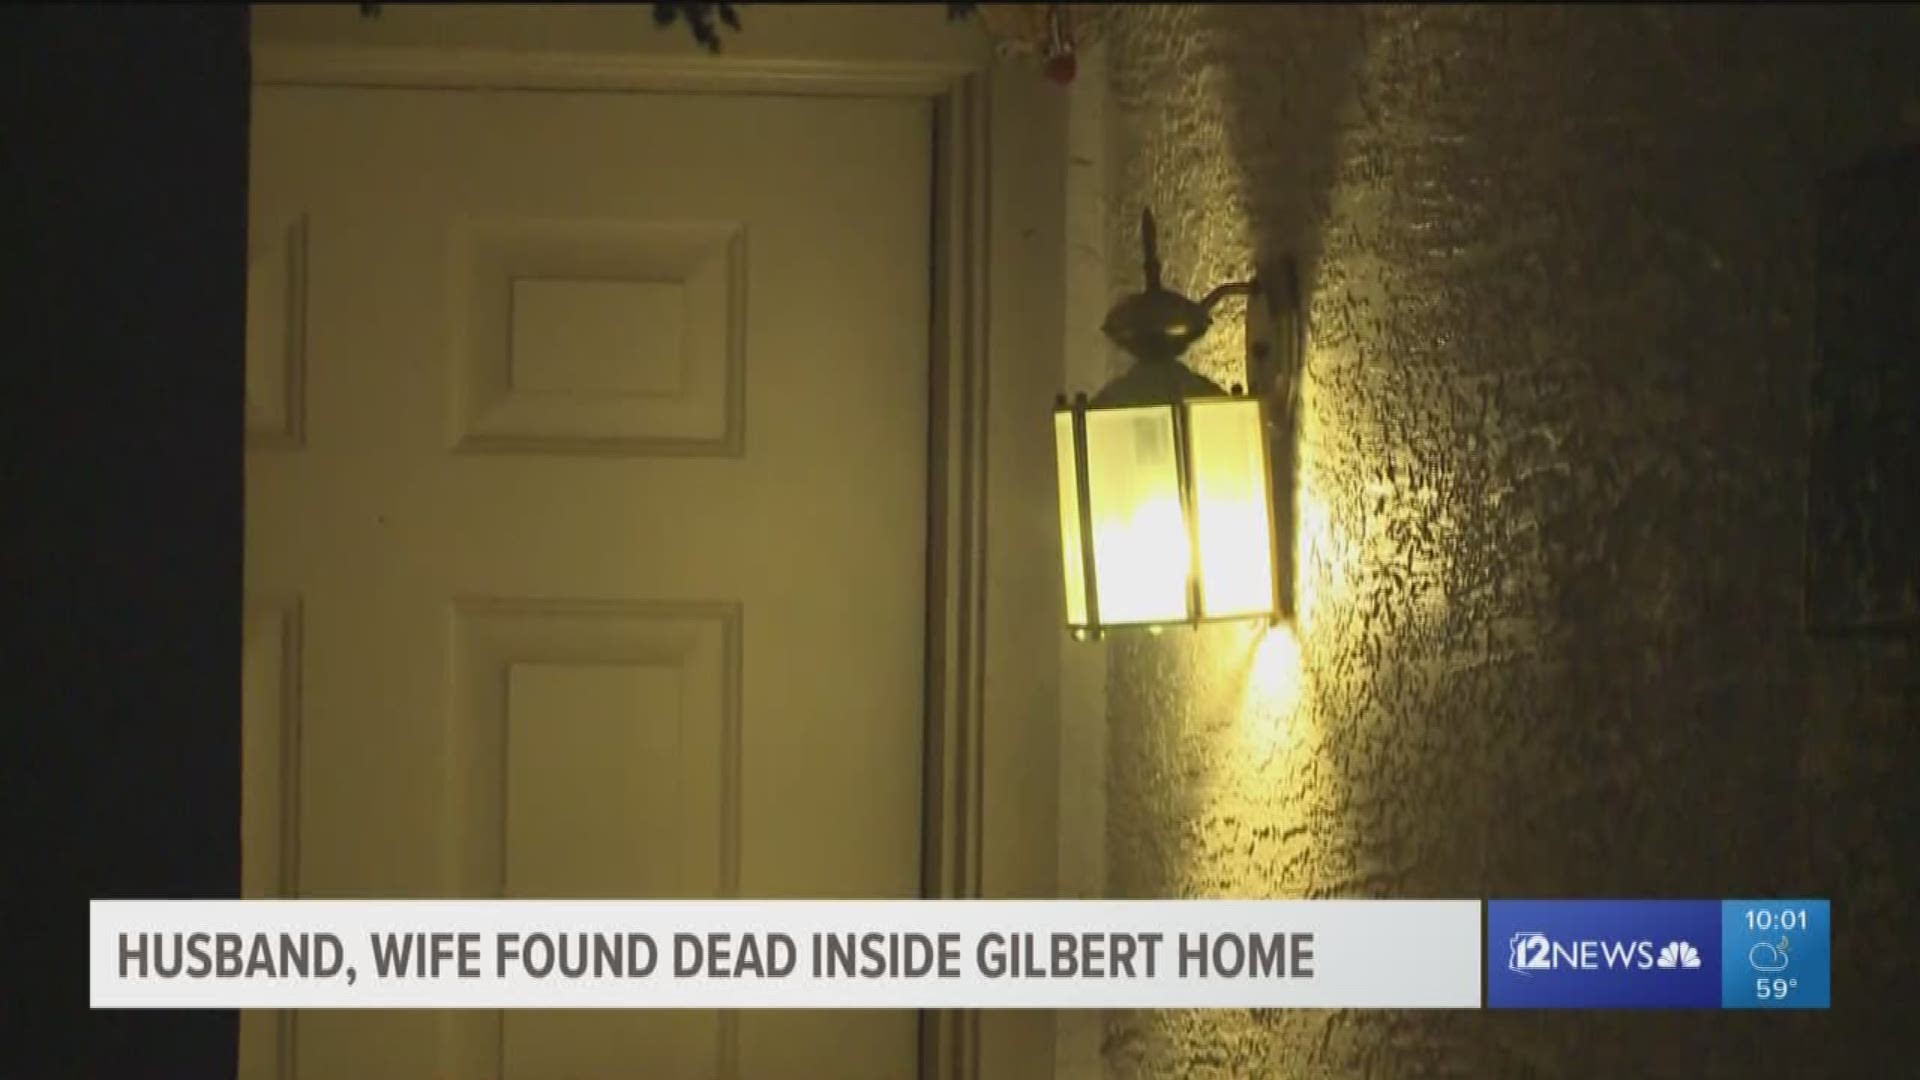 Officers responded to the home late Friday night and Gilbert PD confirmed Sunday it was believed to be a murder suicide, but motive is unknown.